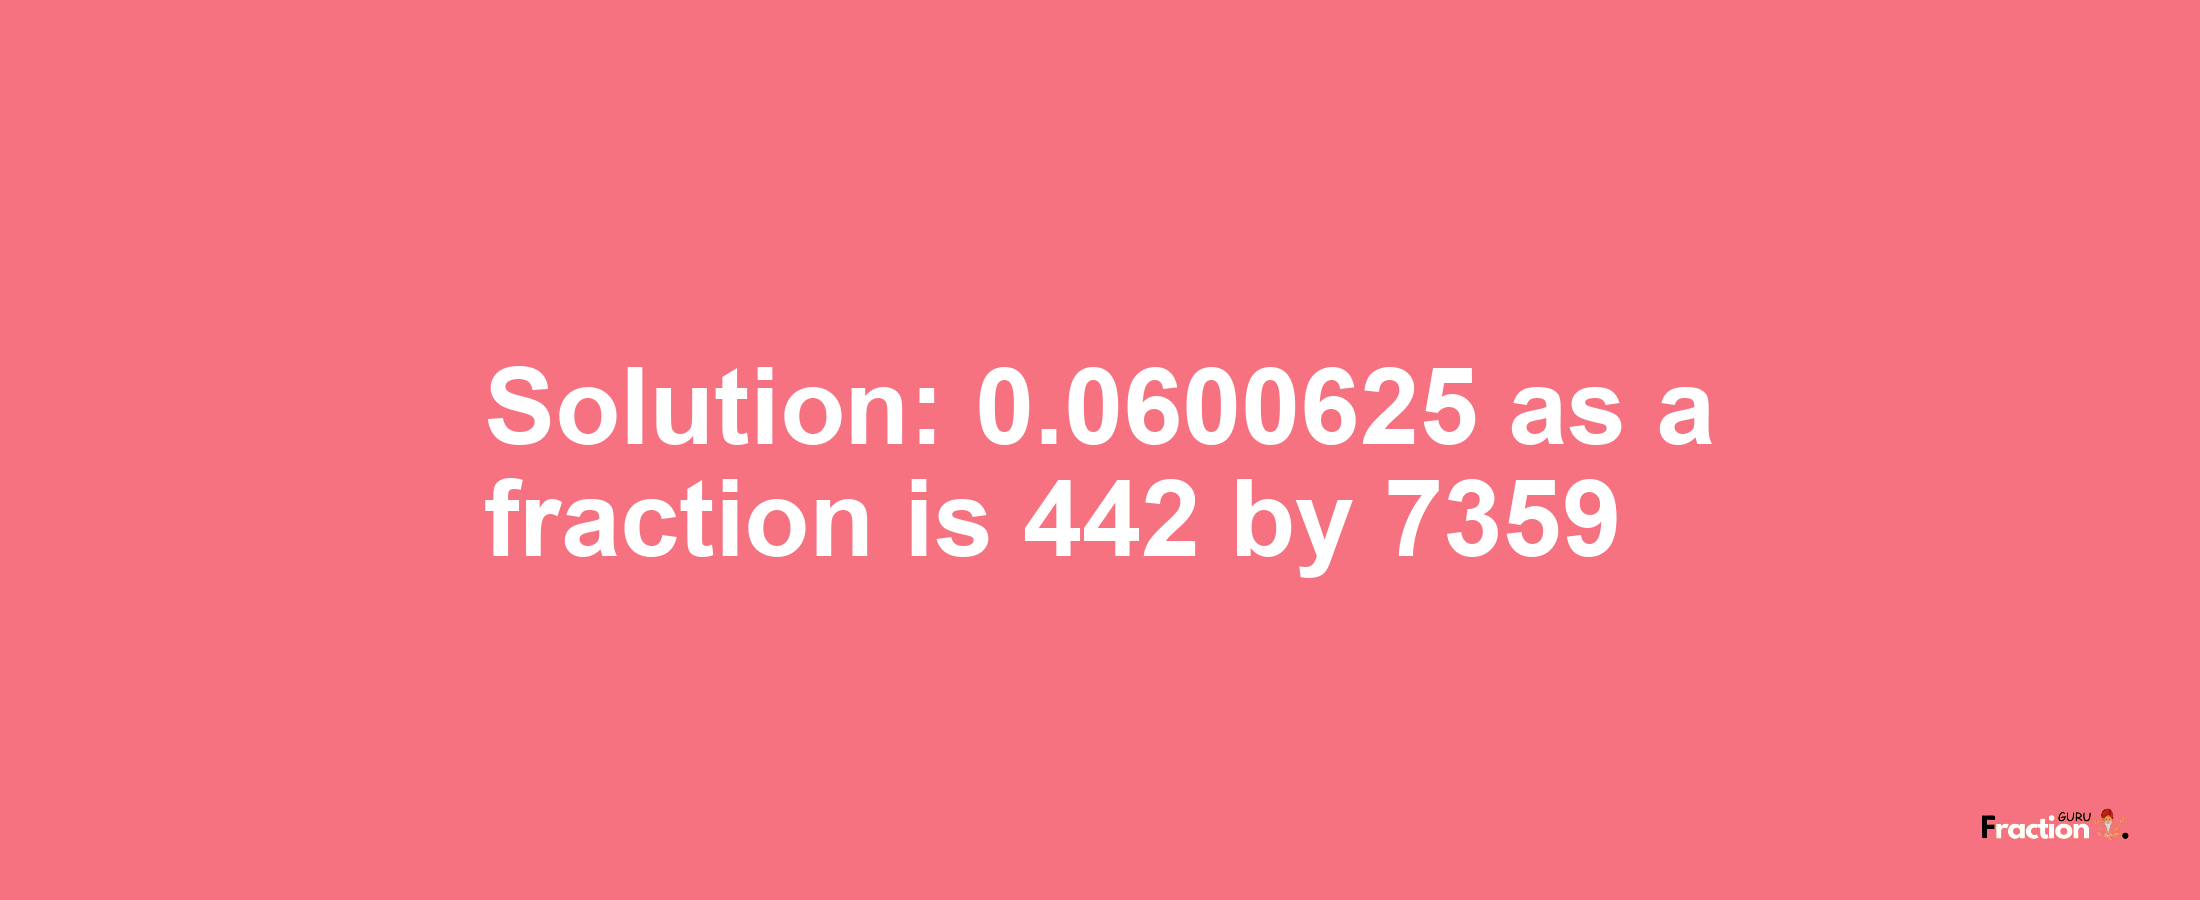 Solution:0.0600625 as a fraction is 442/7359